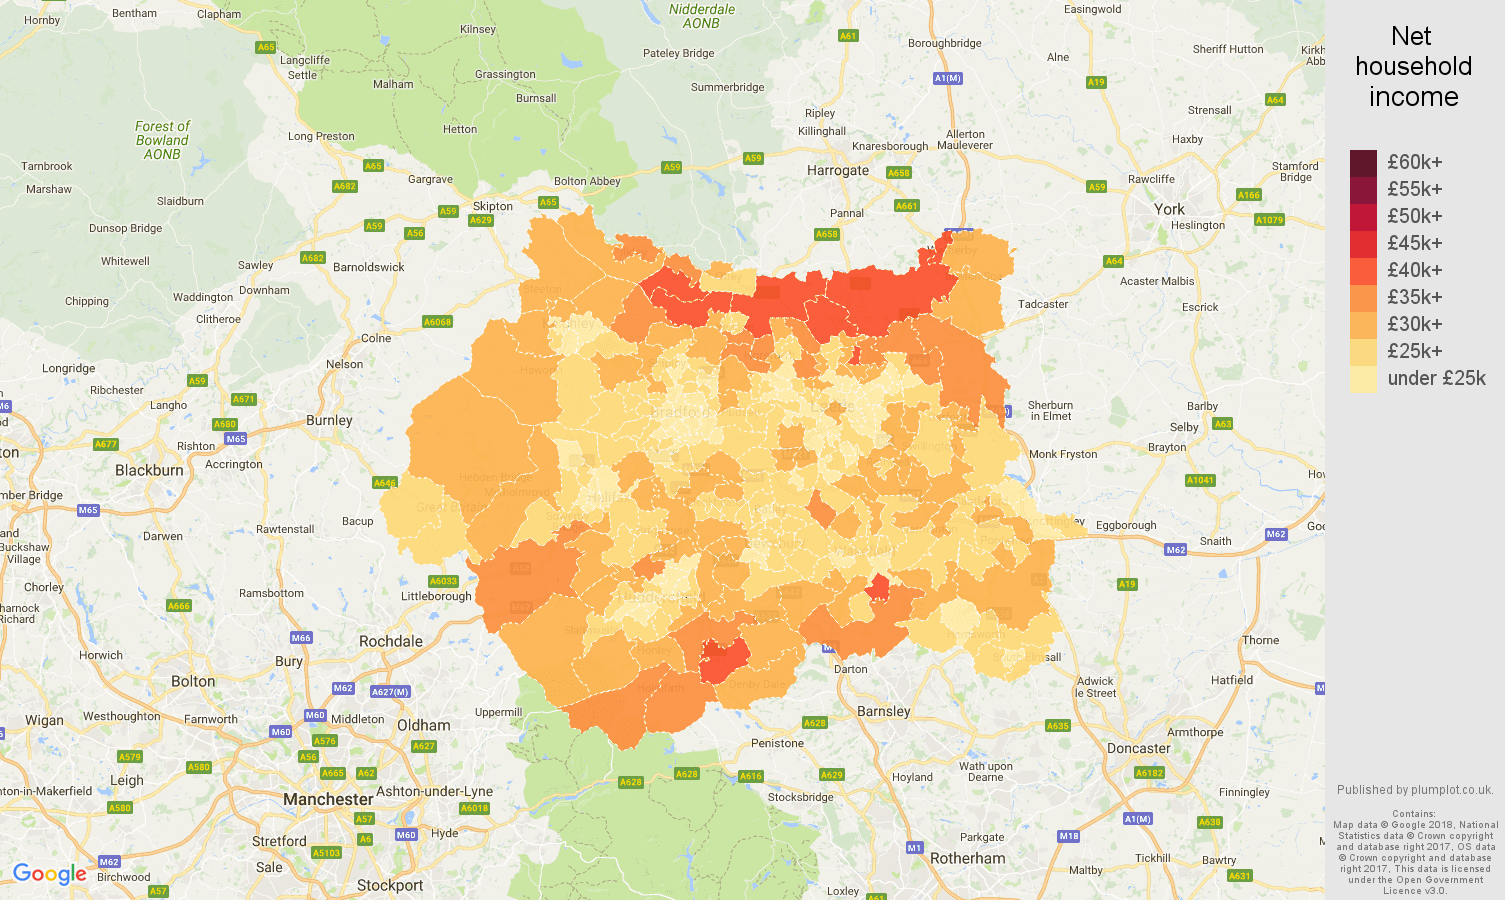 West Yorkshire net household income map